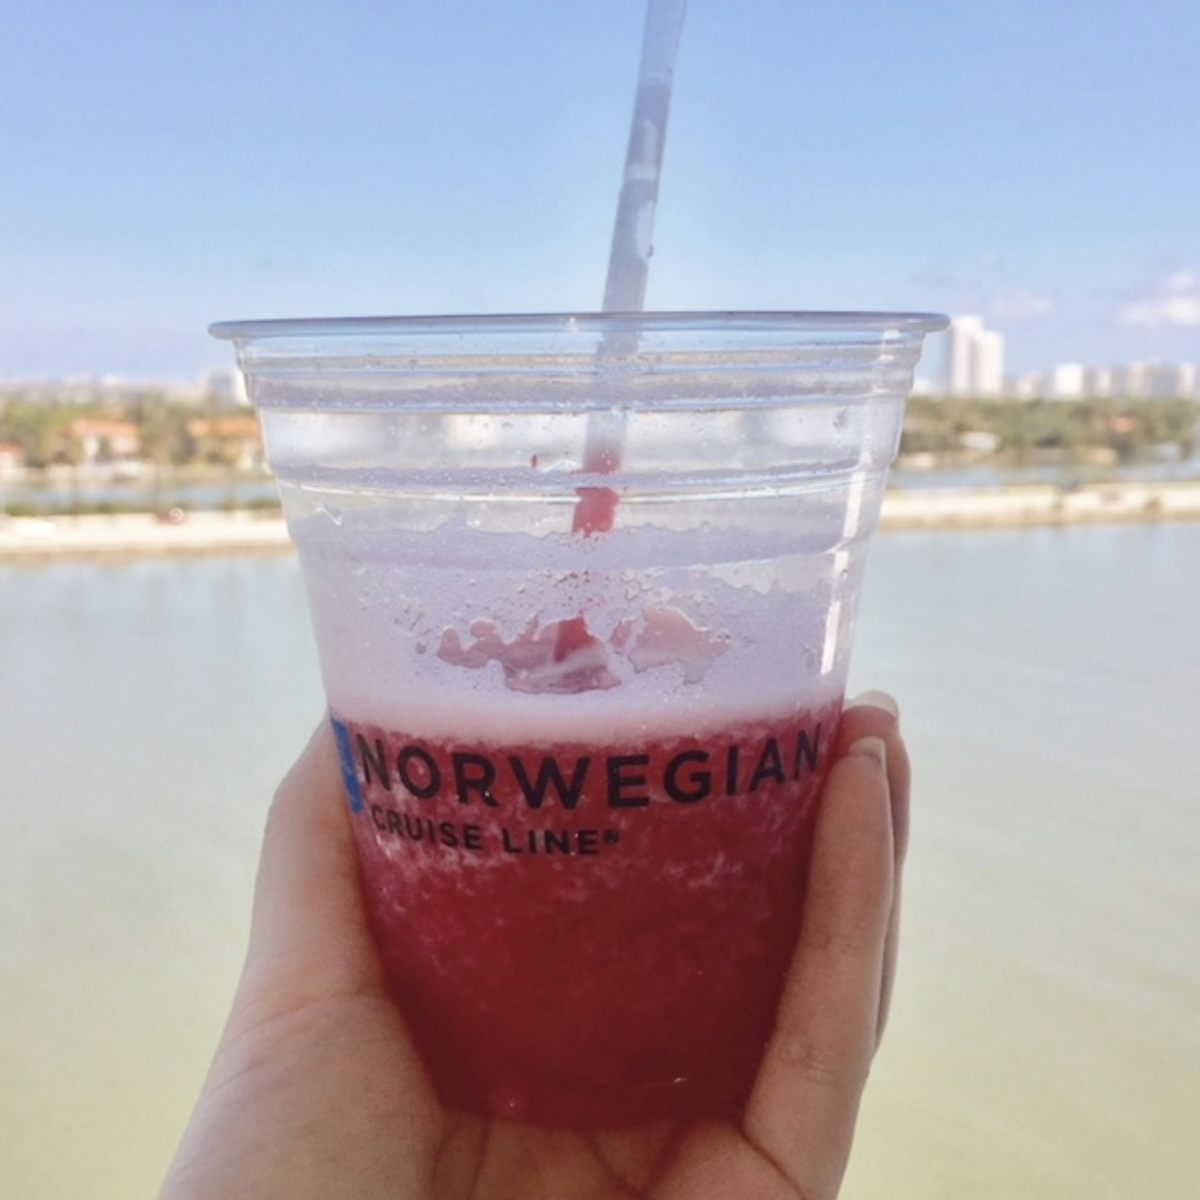 A nice refreshing frozen drink before leaving Port of Miami!